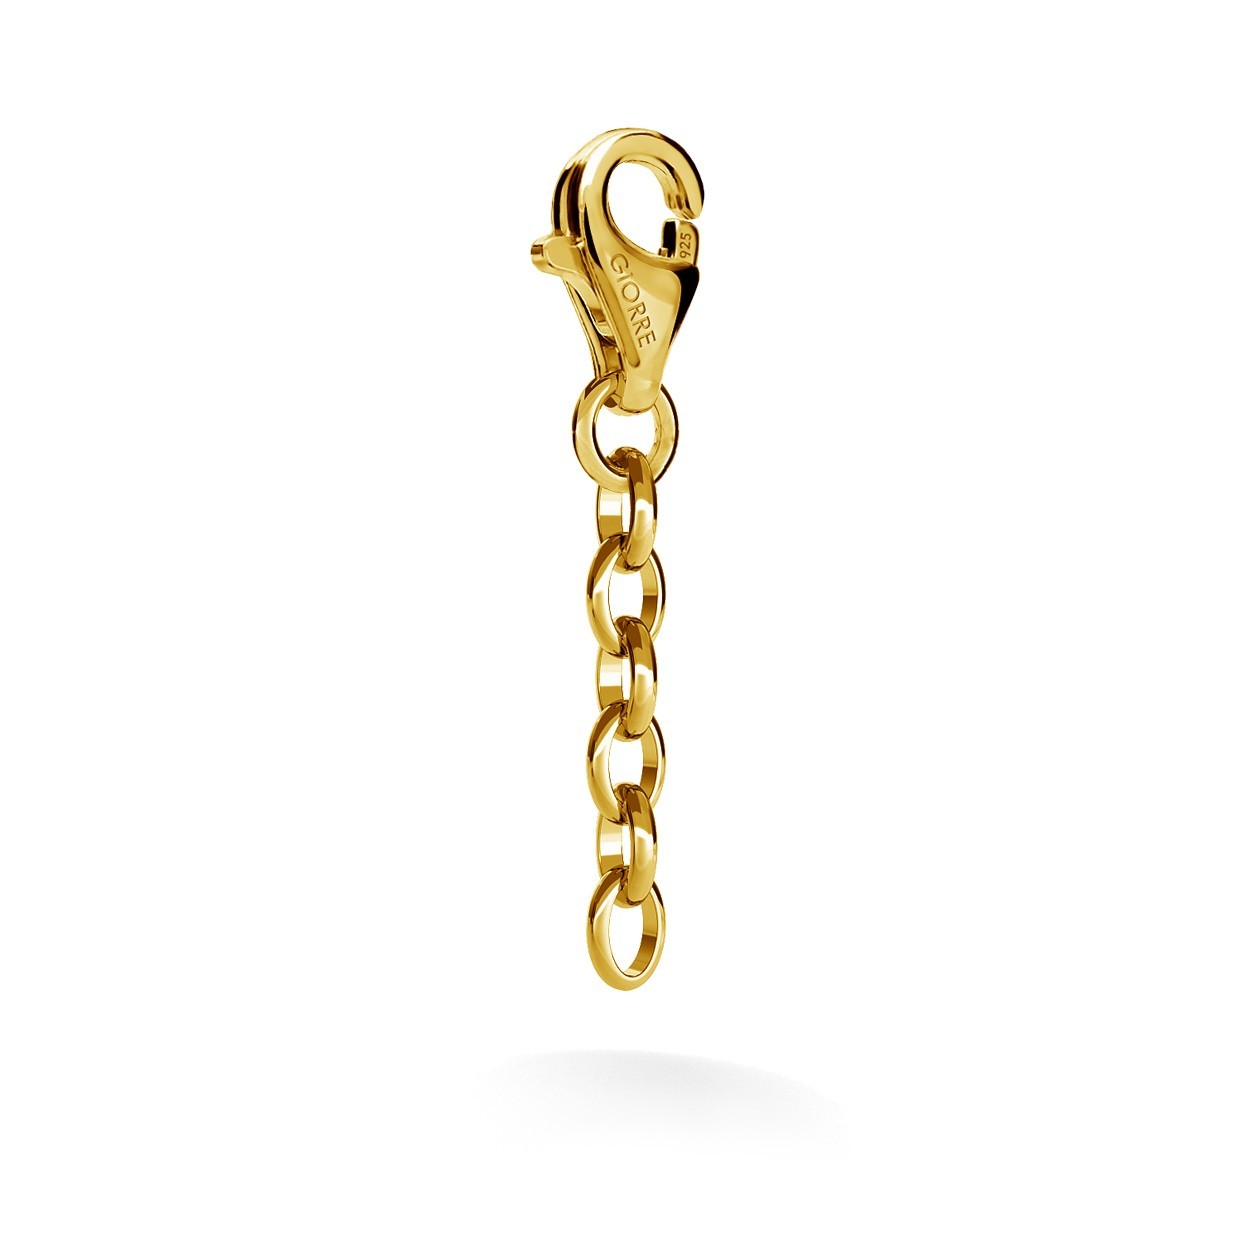 30 MM EXTENSION TO CHARMS GIORRE, STERLING SILVER (925) RHODIUM OR GOLD PLATED